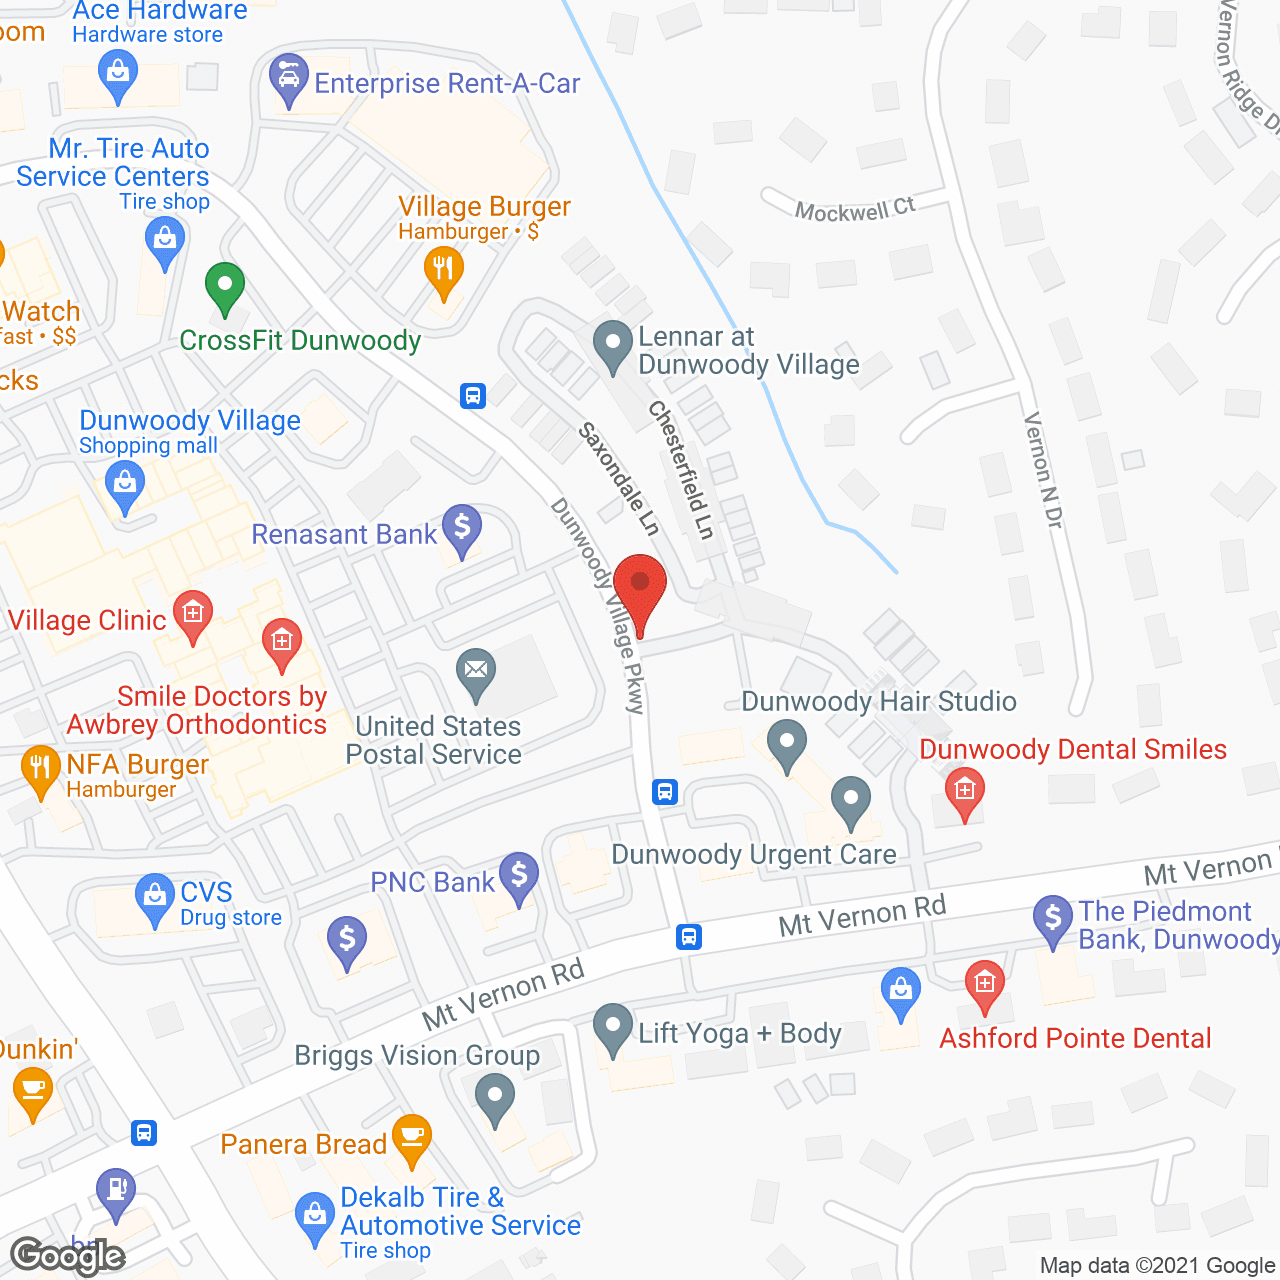 HomeWell Care Services of North Atlanta, GA in google map